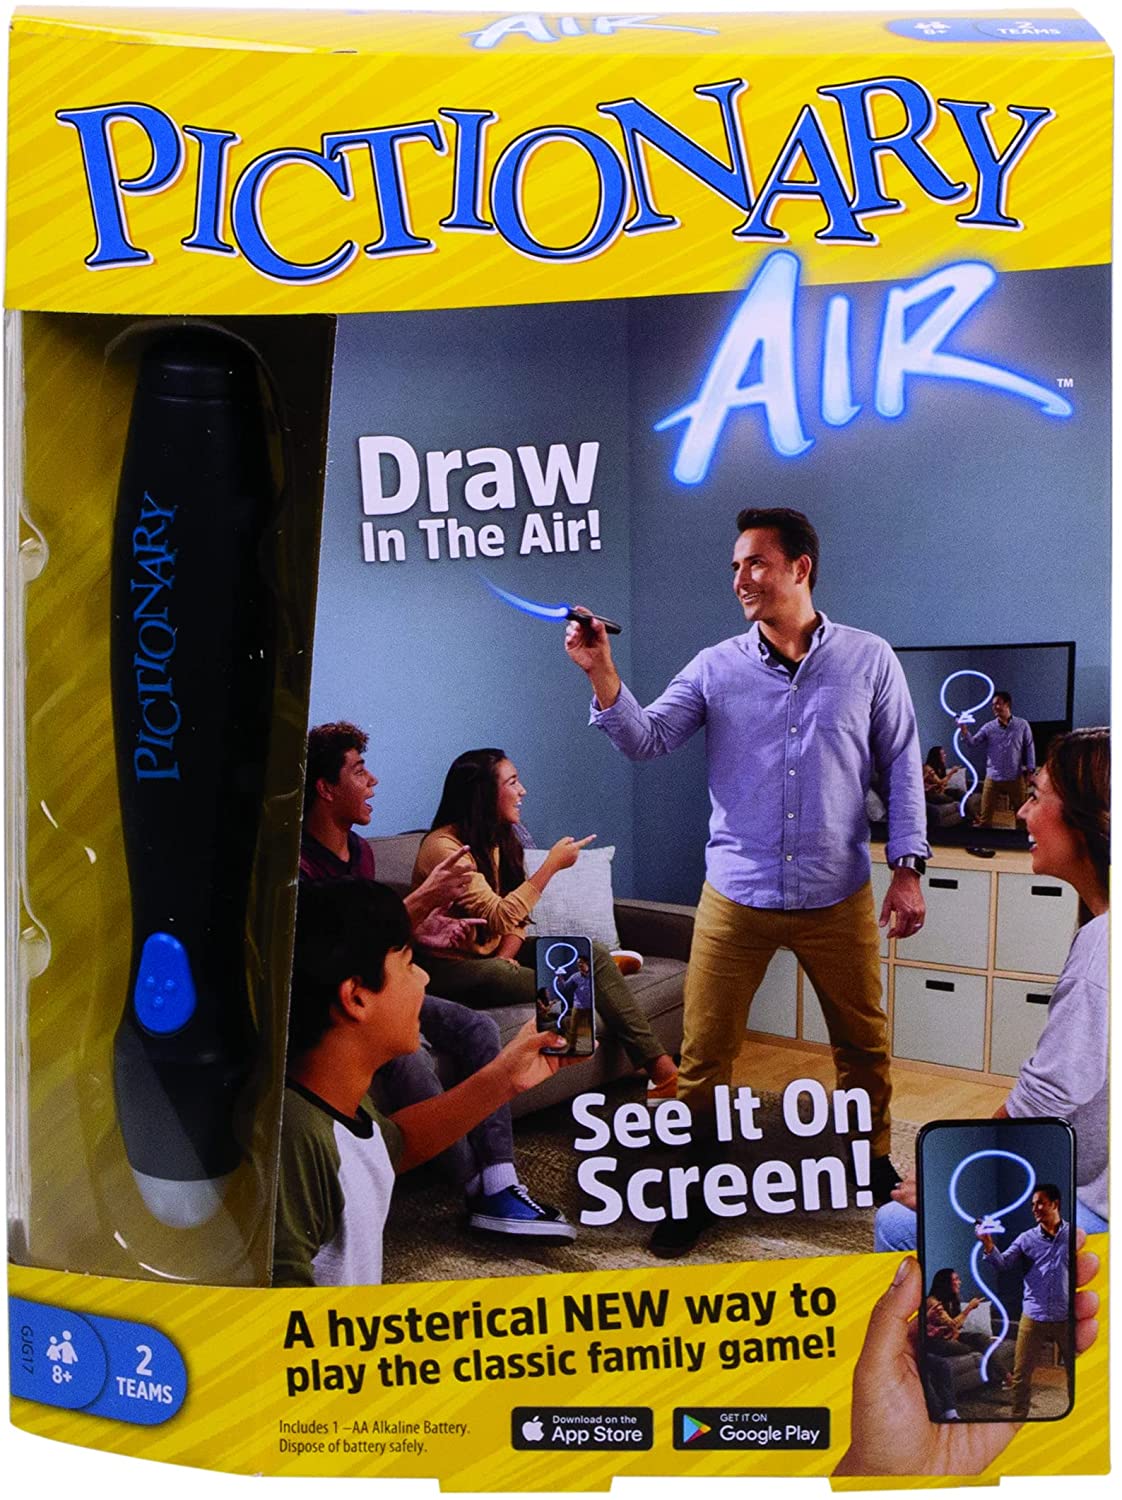 Pictionary Air Mattel Games Classic Family Fun Game - play through your TV  - NEW